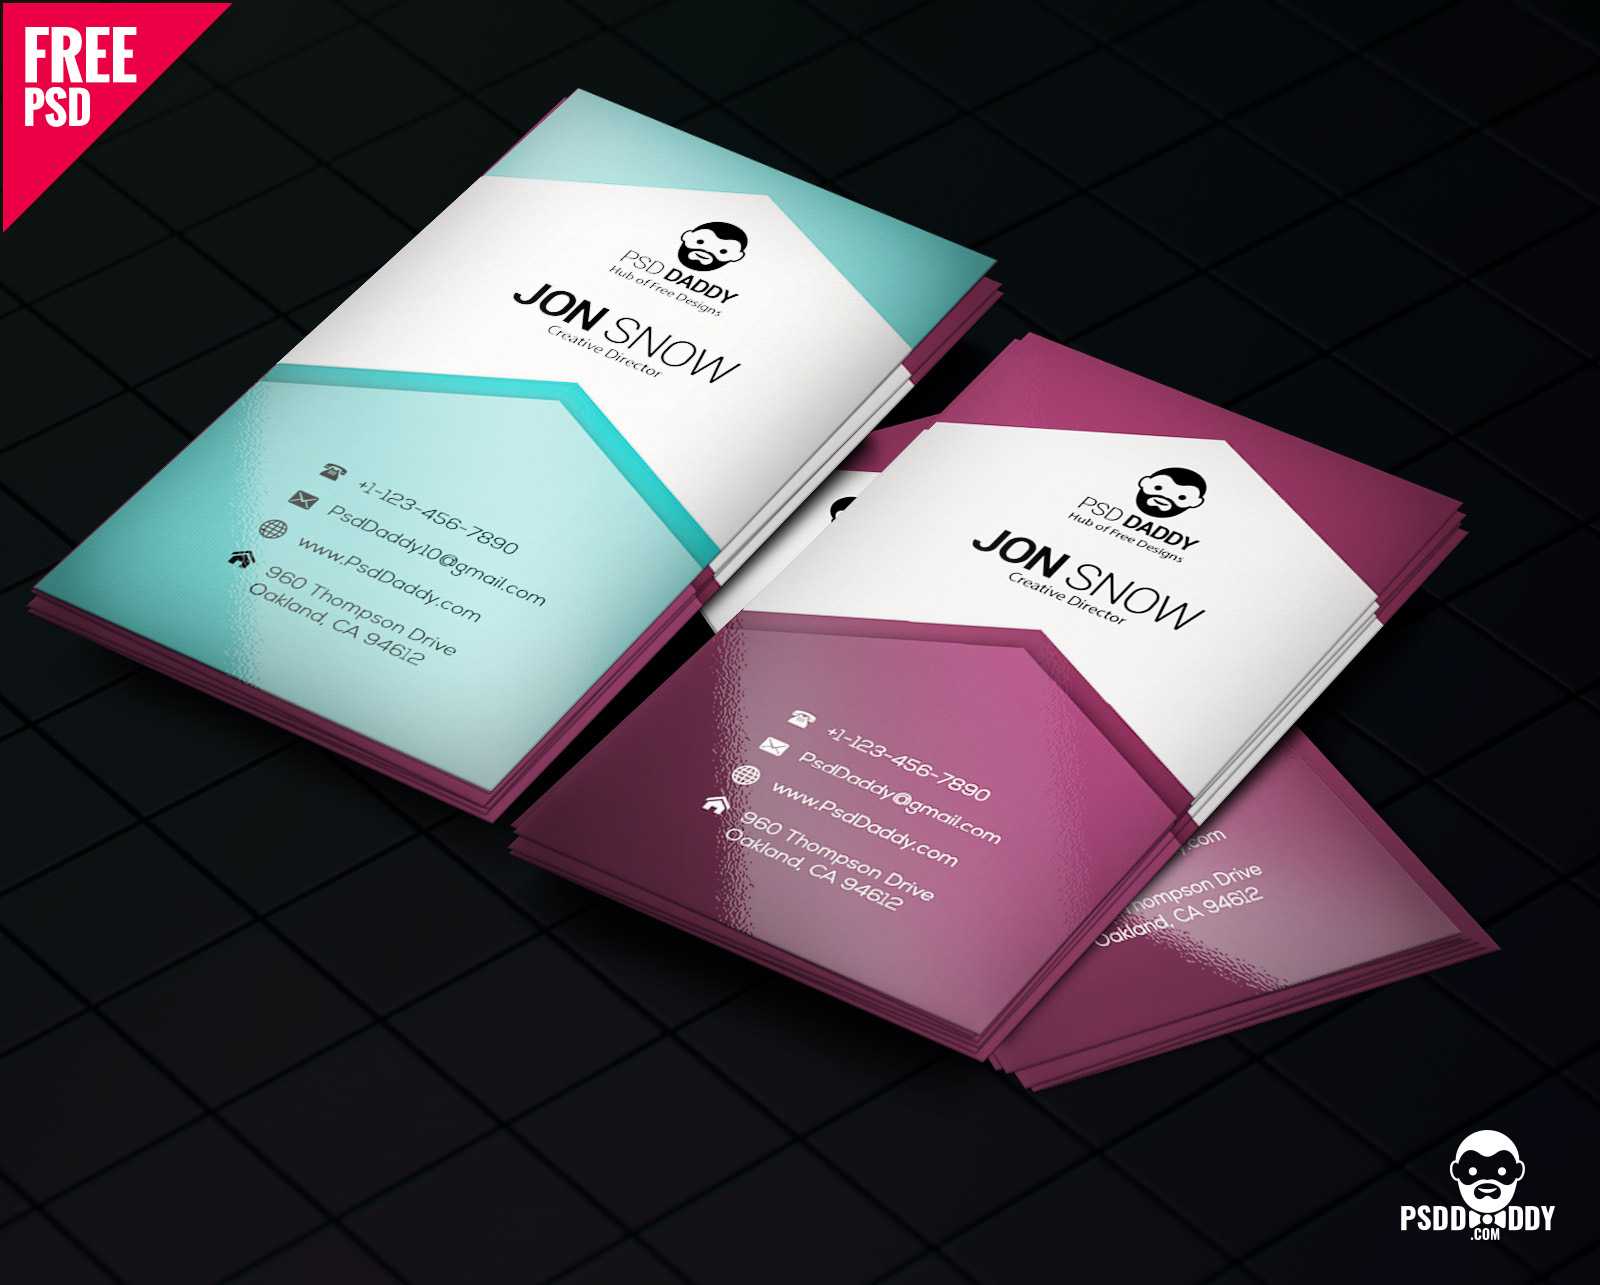 Download]Creative Business Card Psd Free | Psddaddy Within Creative Business Card Templates Psd